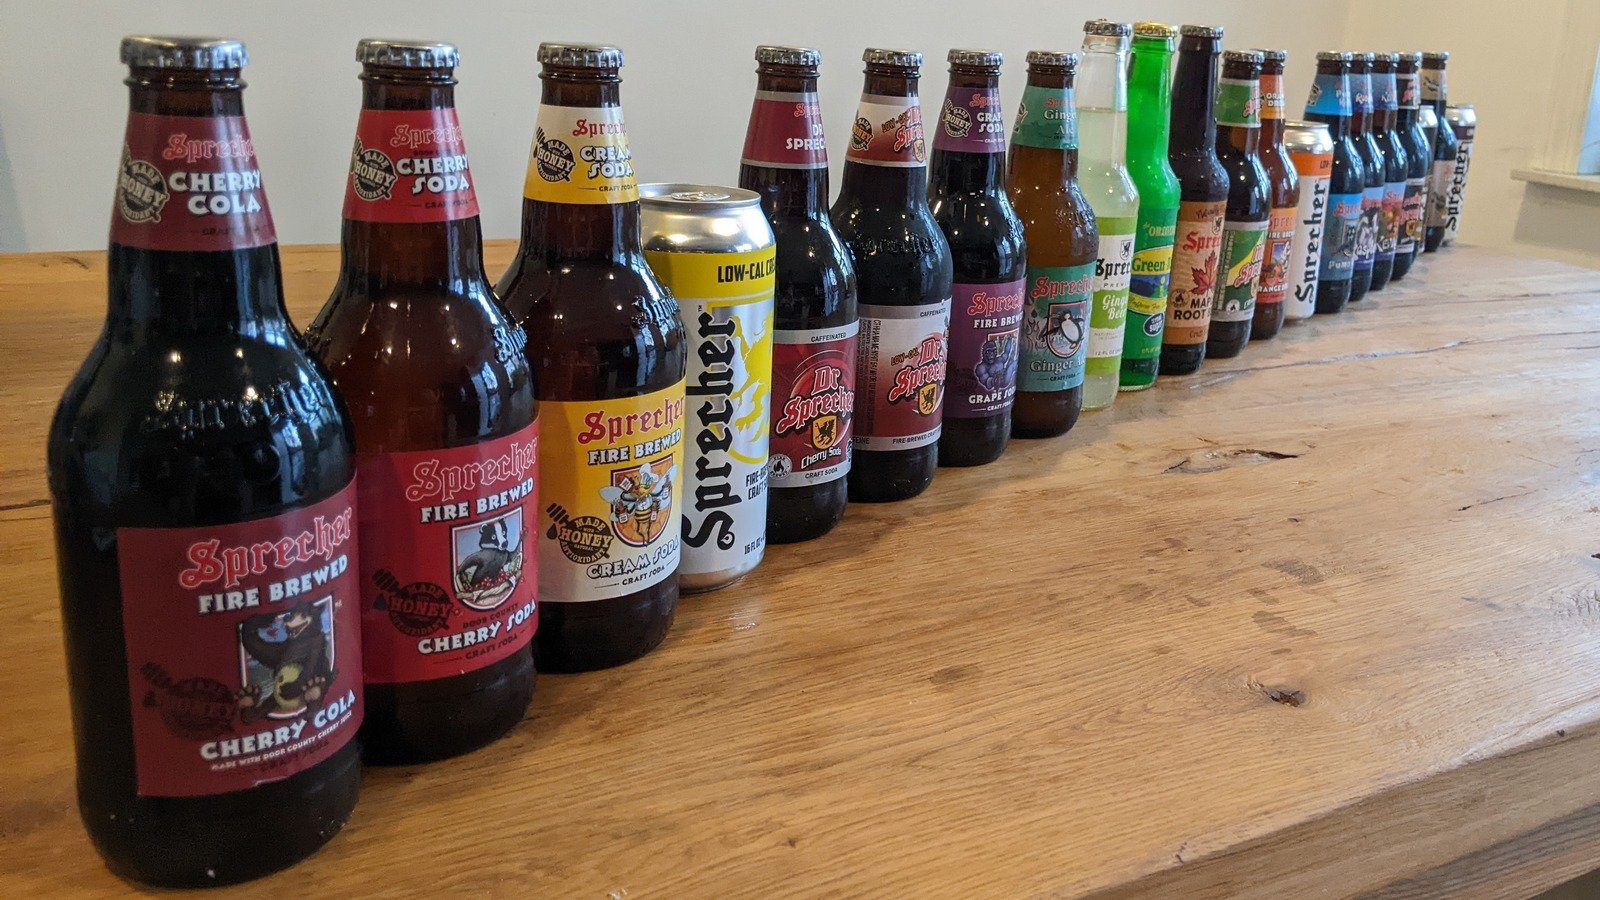 20 Sprecher Soda Flavors, Ranked From Worst To Best